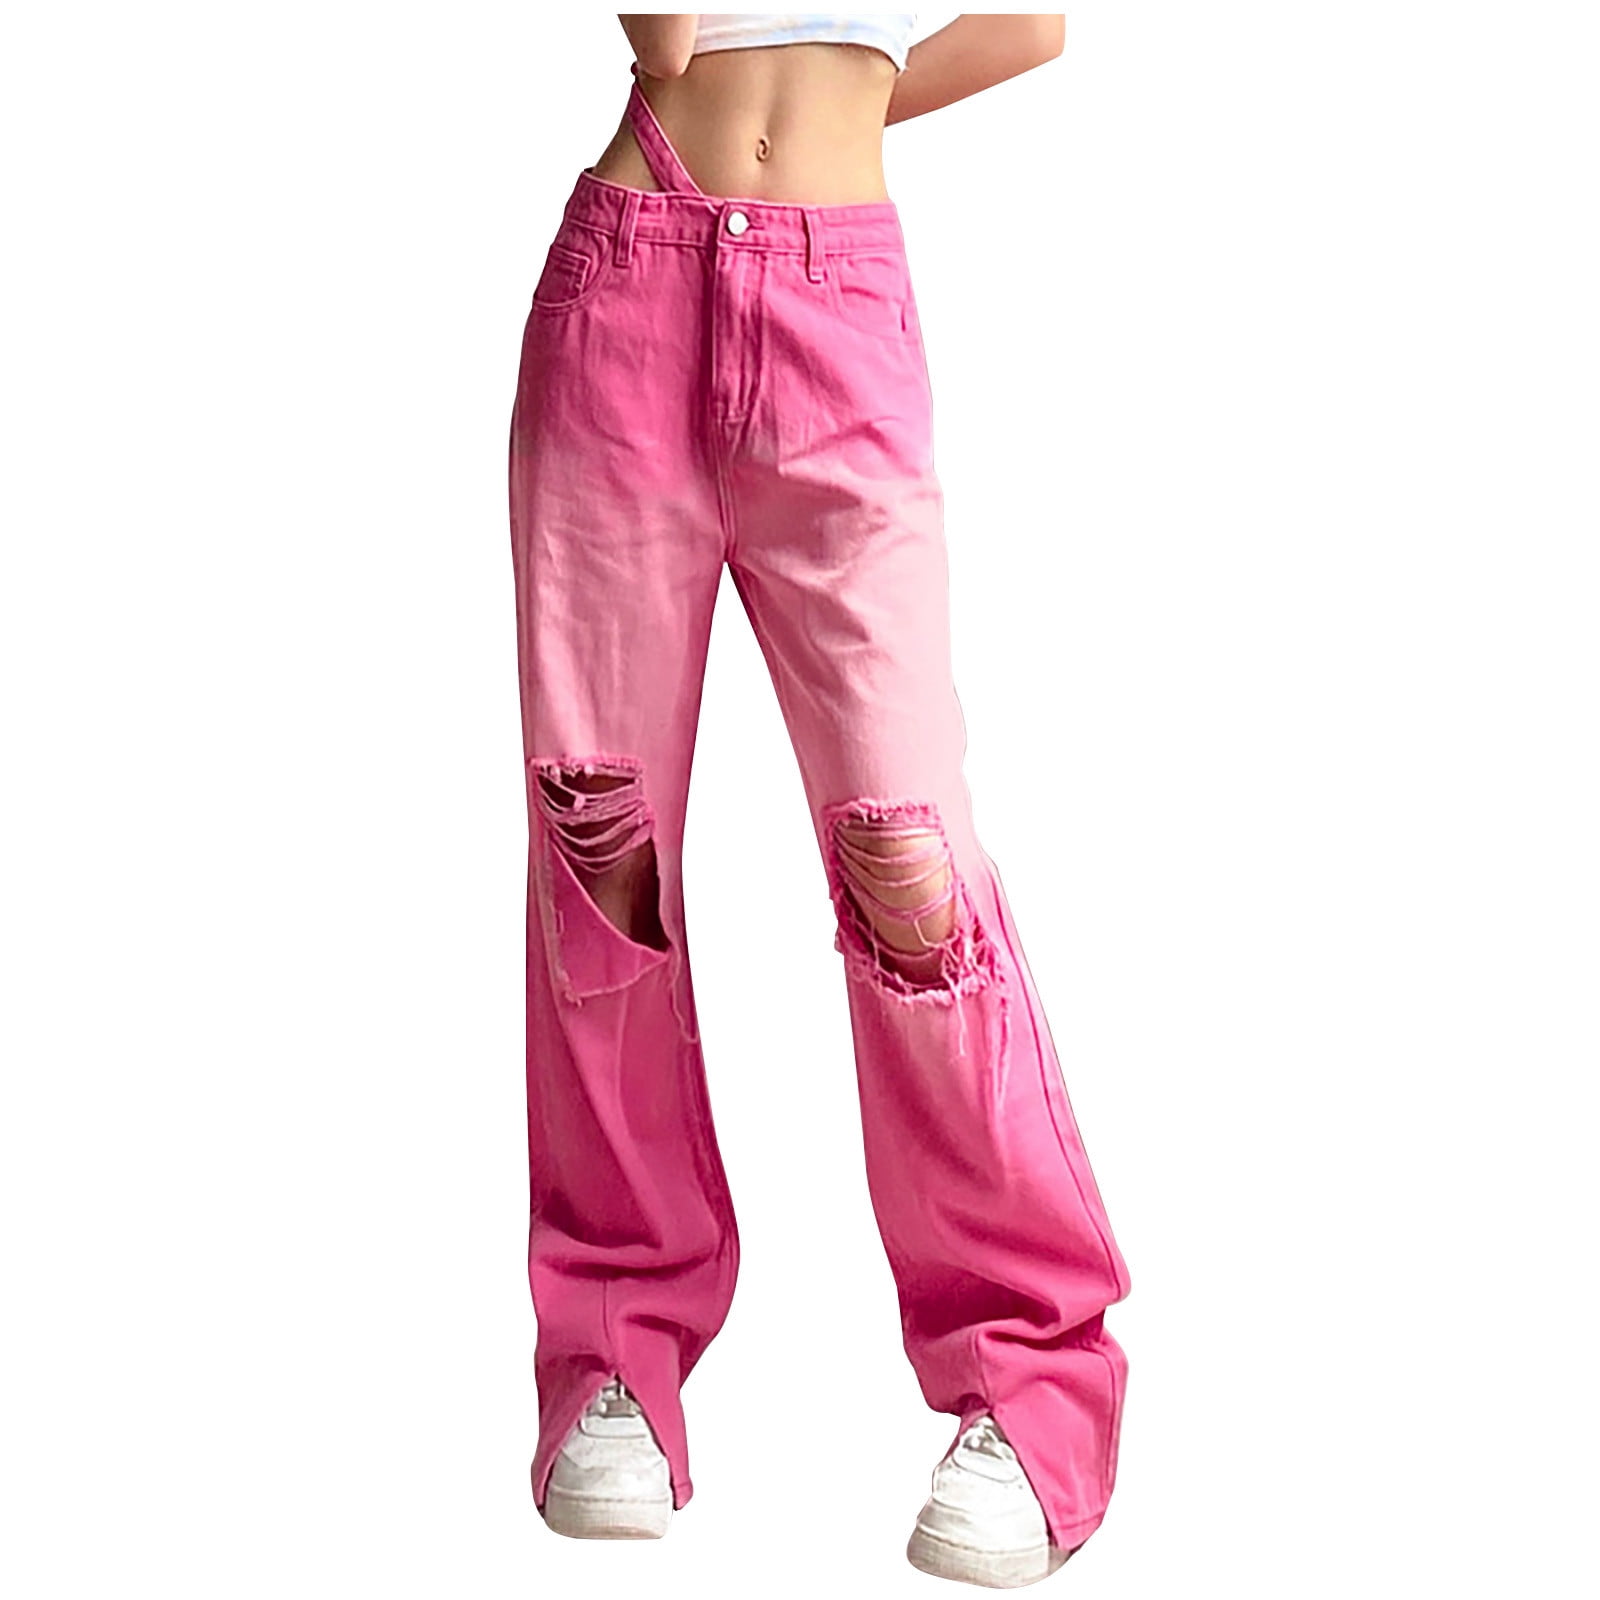 Reduce Price Hfyihgf Baggy Jeans for Women Y2K Streetwear Ripped Stretch  High Waisted Straight Wide Leg Denim Pants Casual Boyfriend Jeans(Pink,L) 